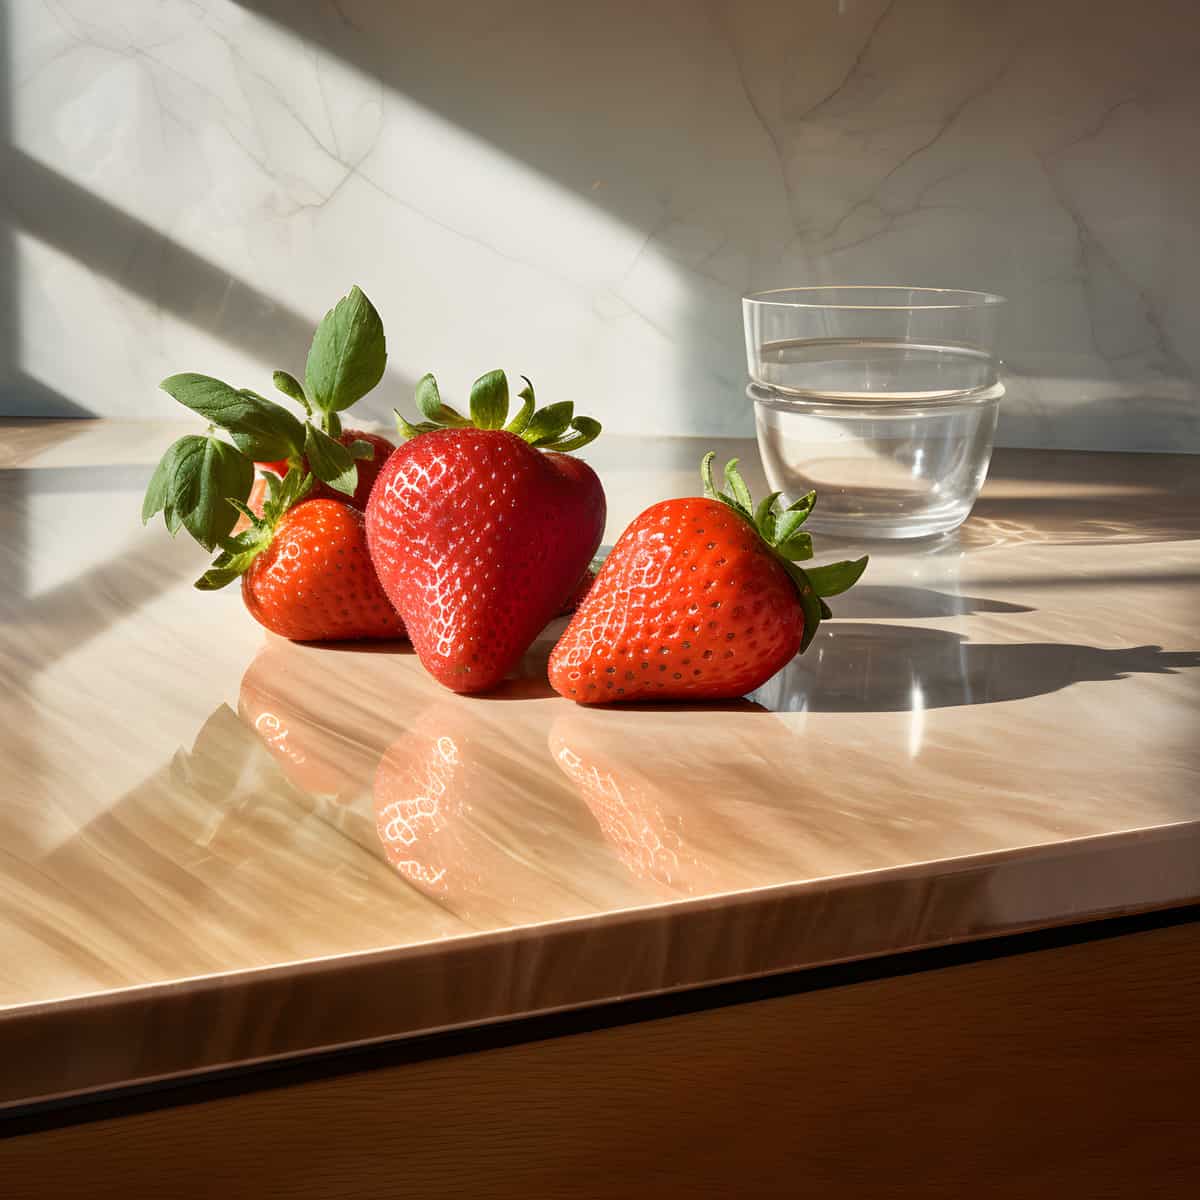 Strawberries on a kitchen counter